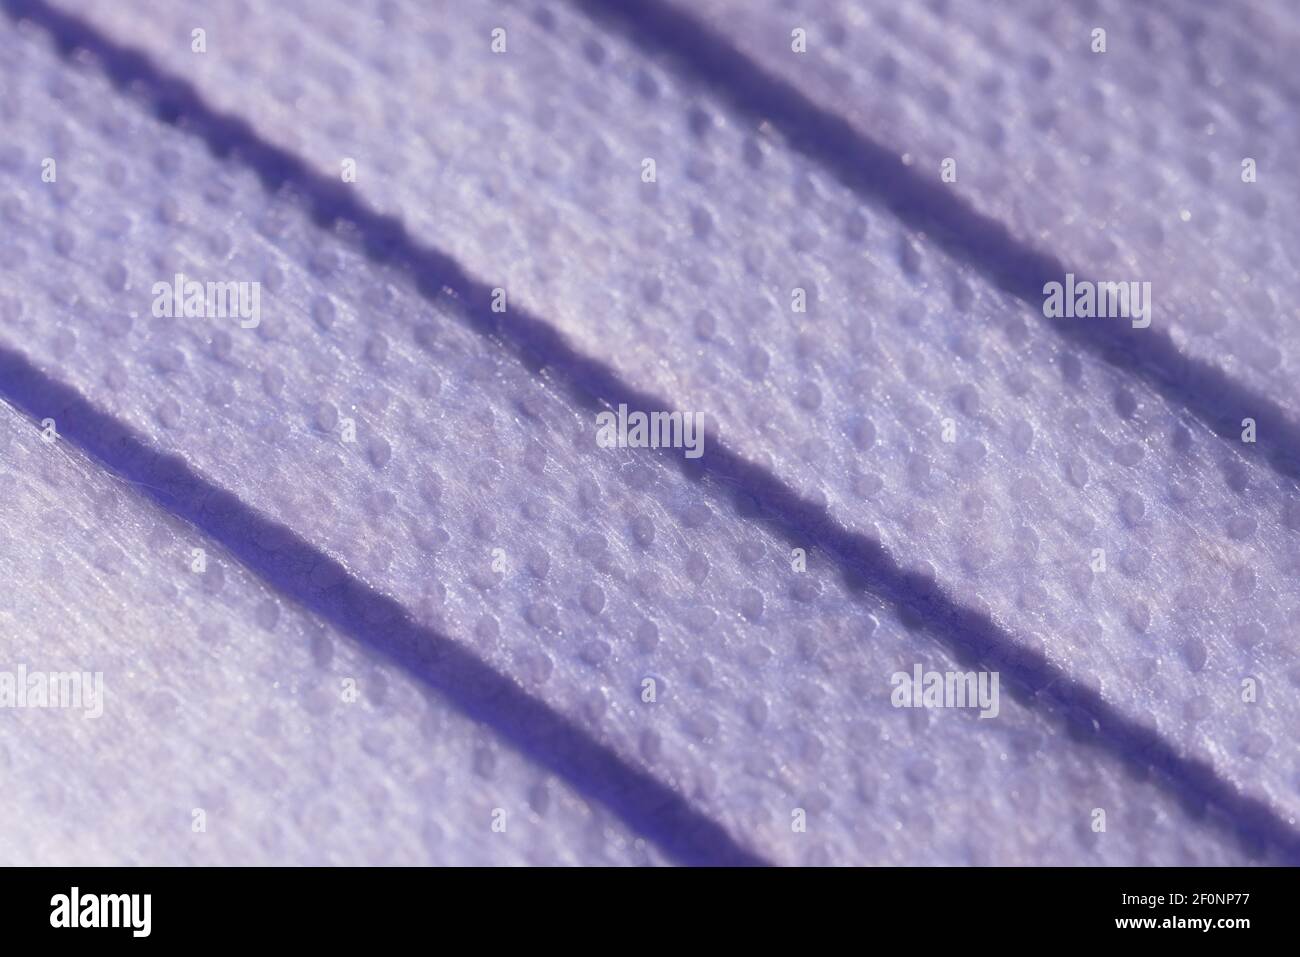 Super macro image showing the surface texture of a 3 ply single use face mask. Medical mask with 3 folds, splash proof and filtering ability. Stock Photo